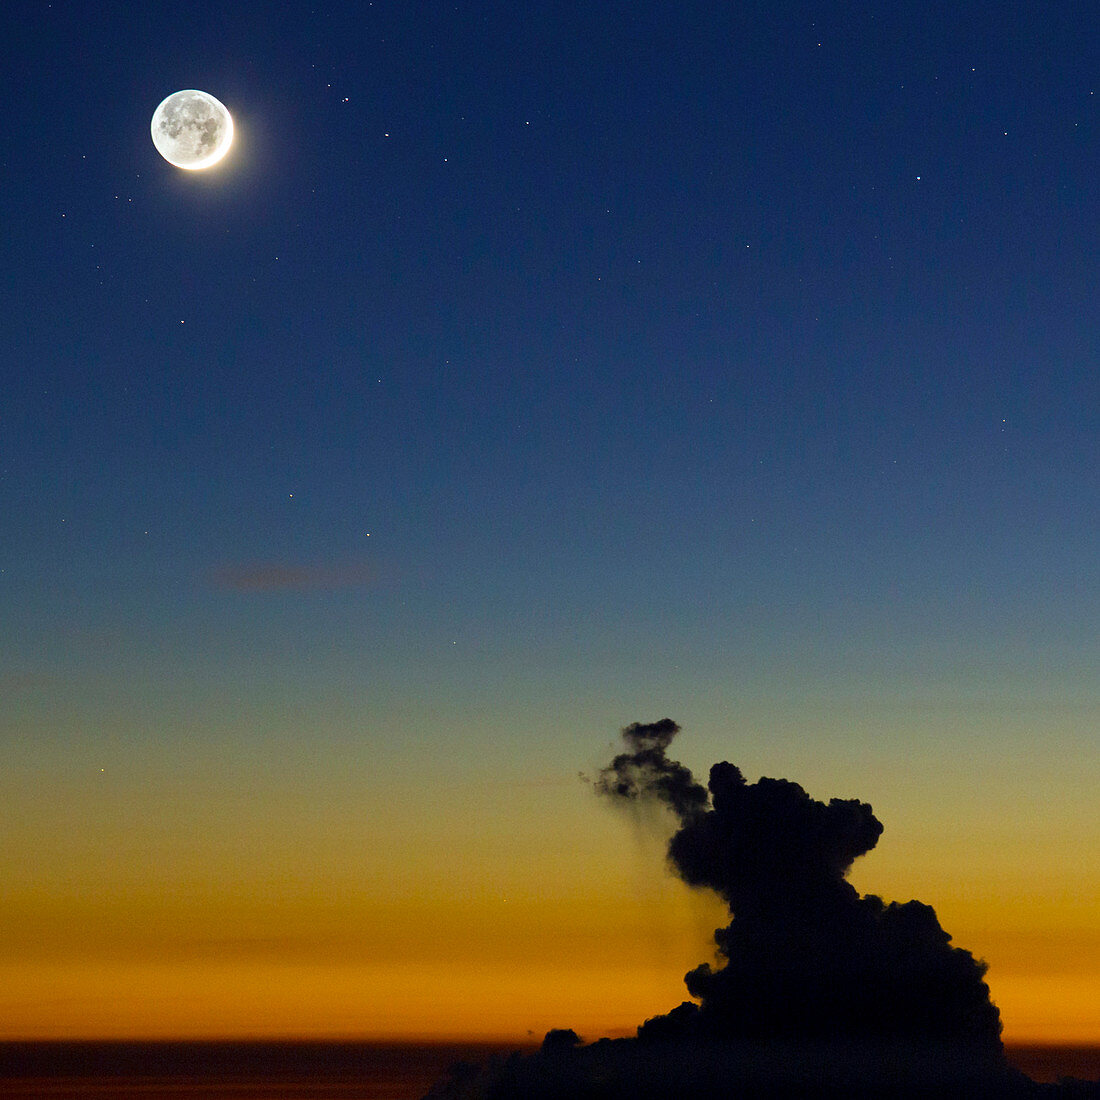 New Moon and earthshine at sunset